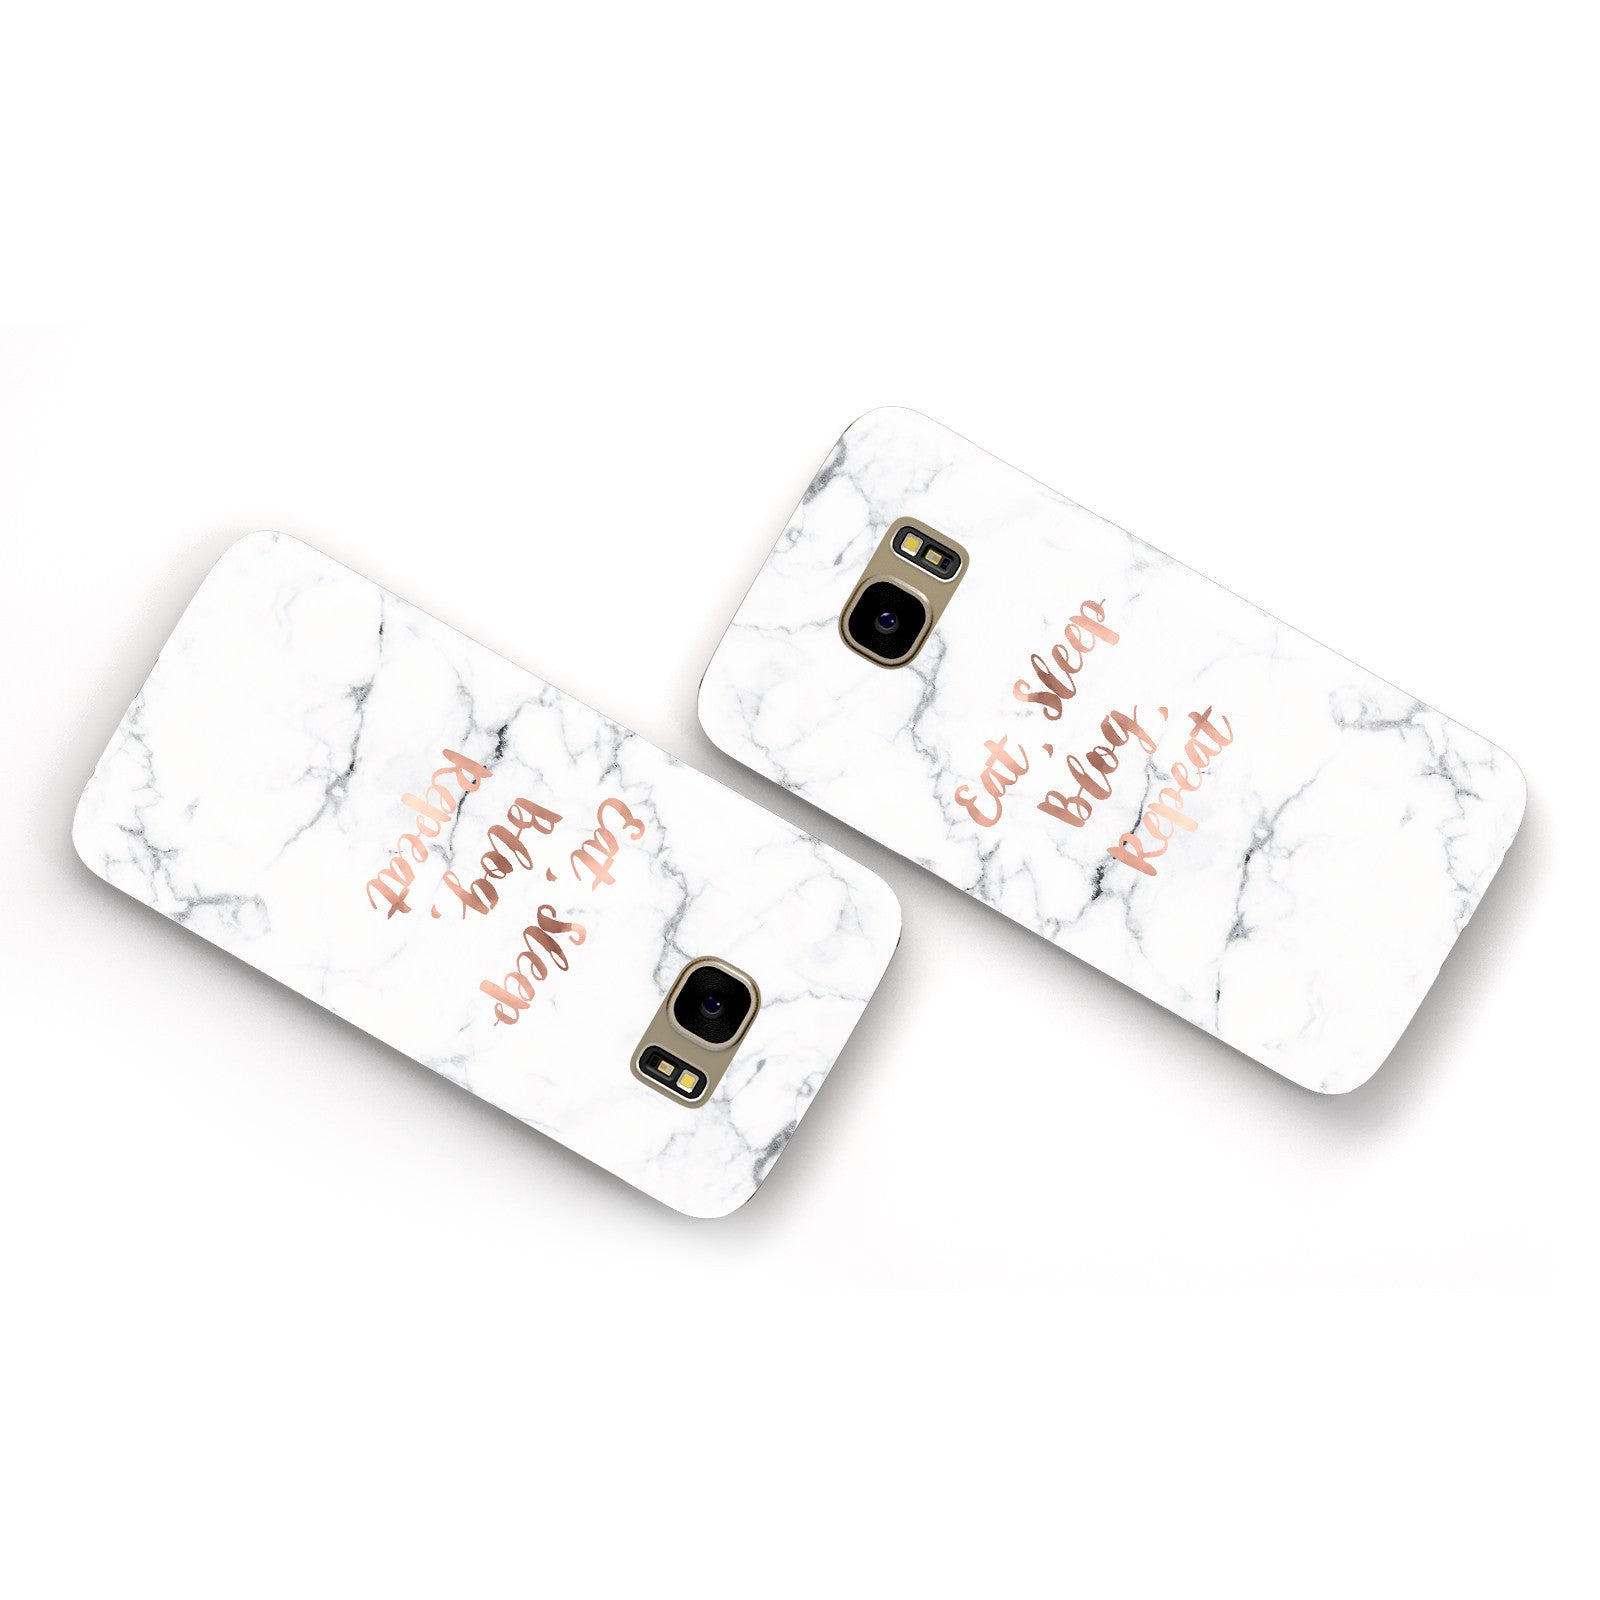 Eat Sleep Blog Repeat Marble Effect Samsung Galaxy Case Flat Overview